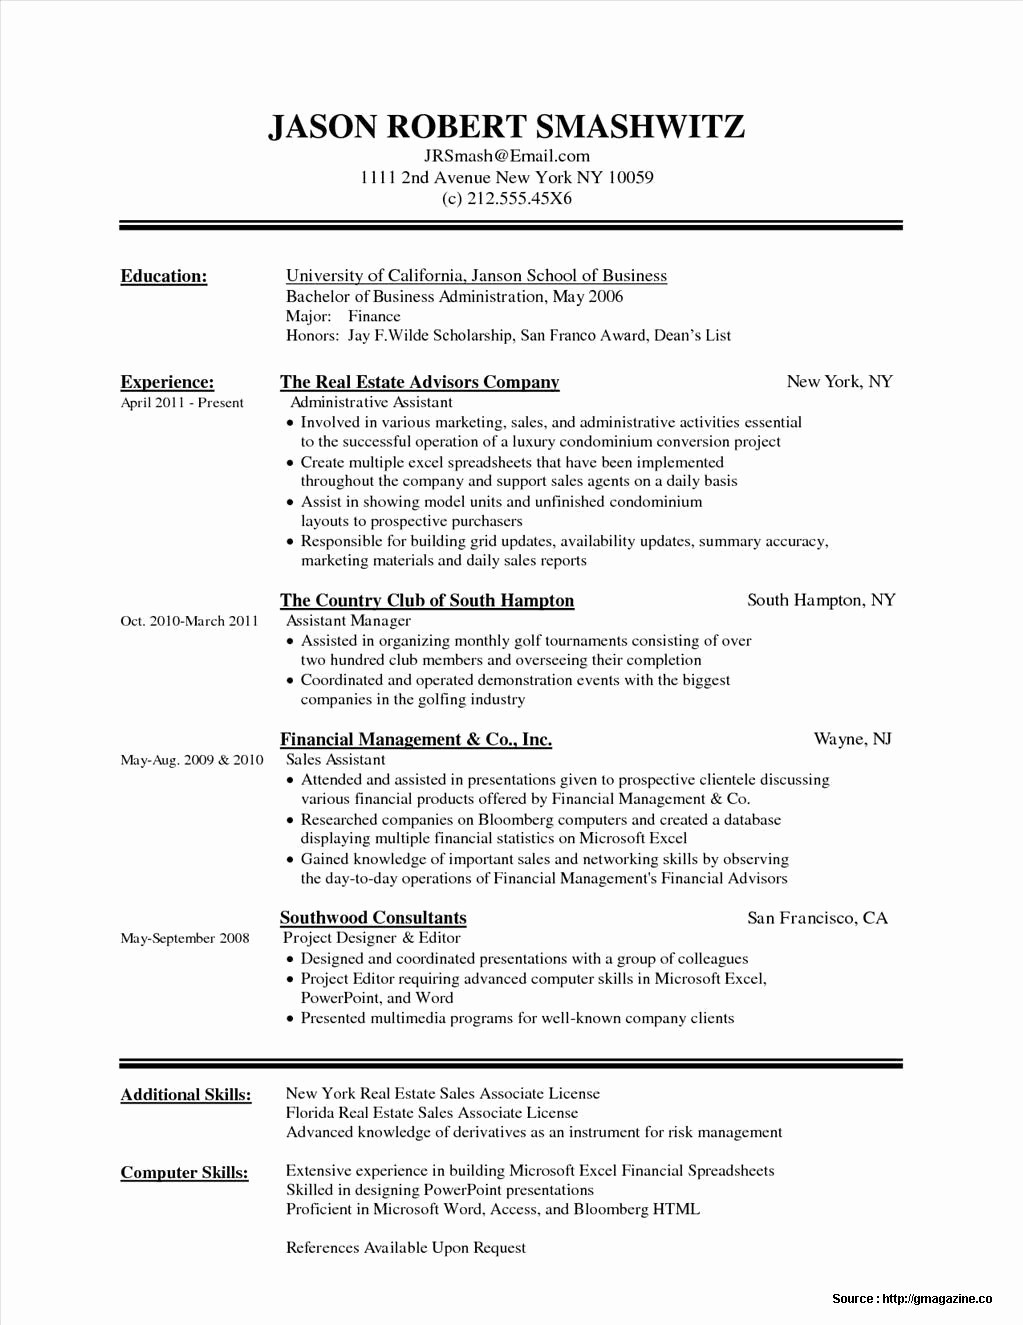 Free Resume Template Download Word New Sample Resume Word Document Free Download Resume